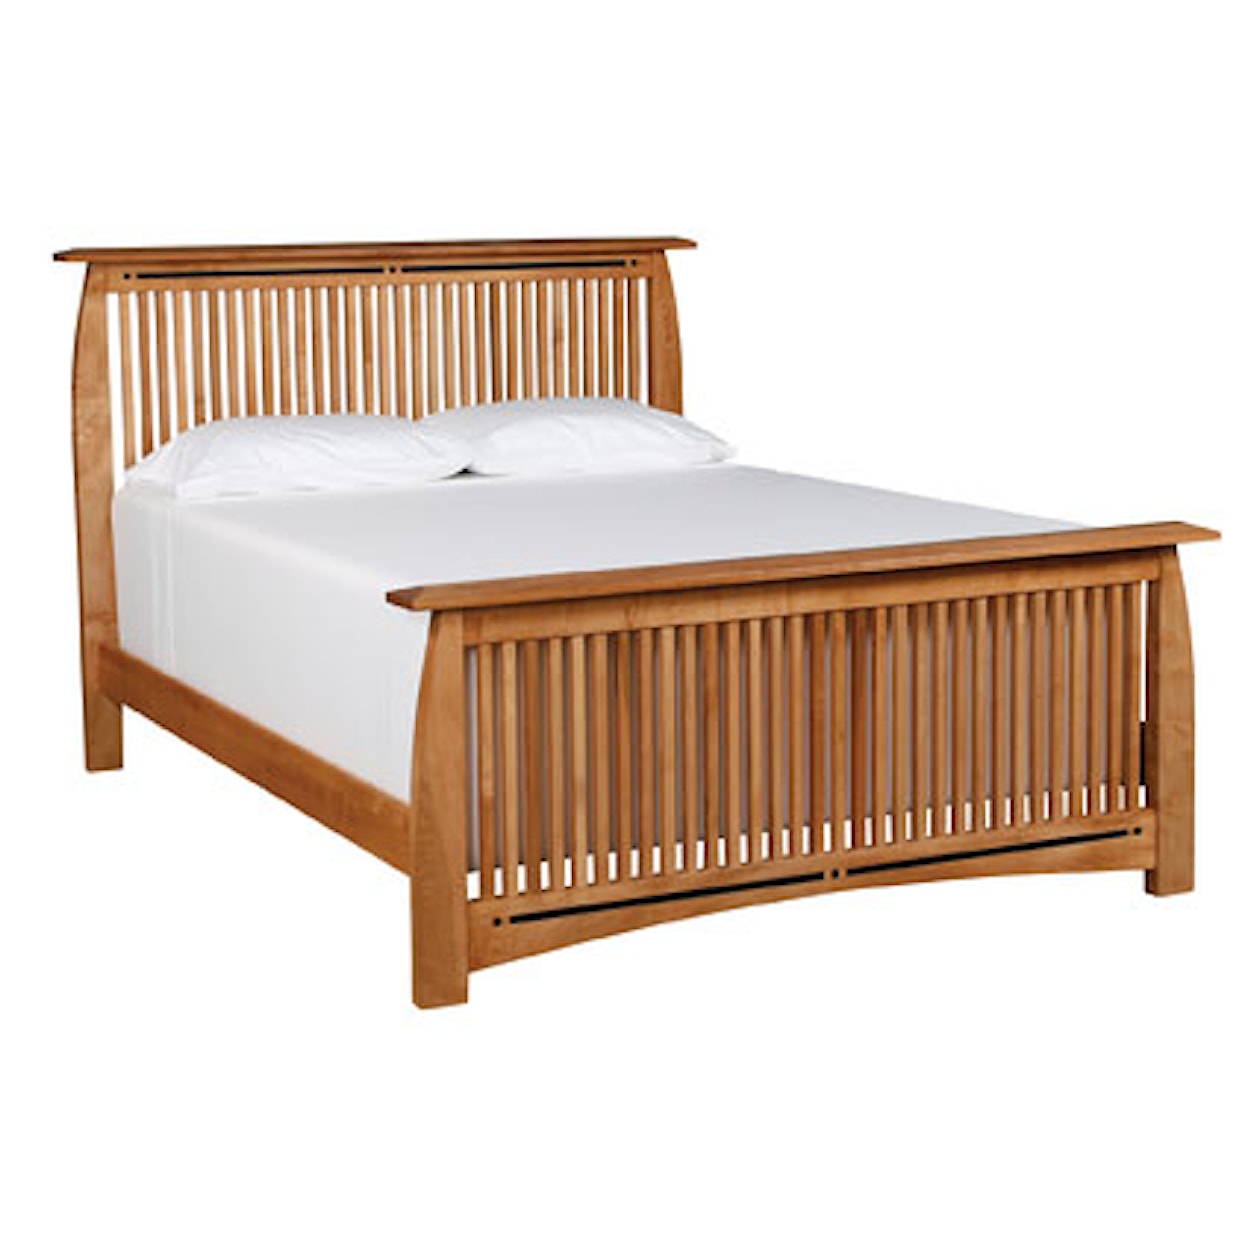 Simply Amish Aspen King Spindle Bed